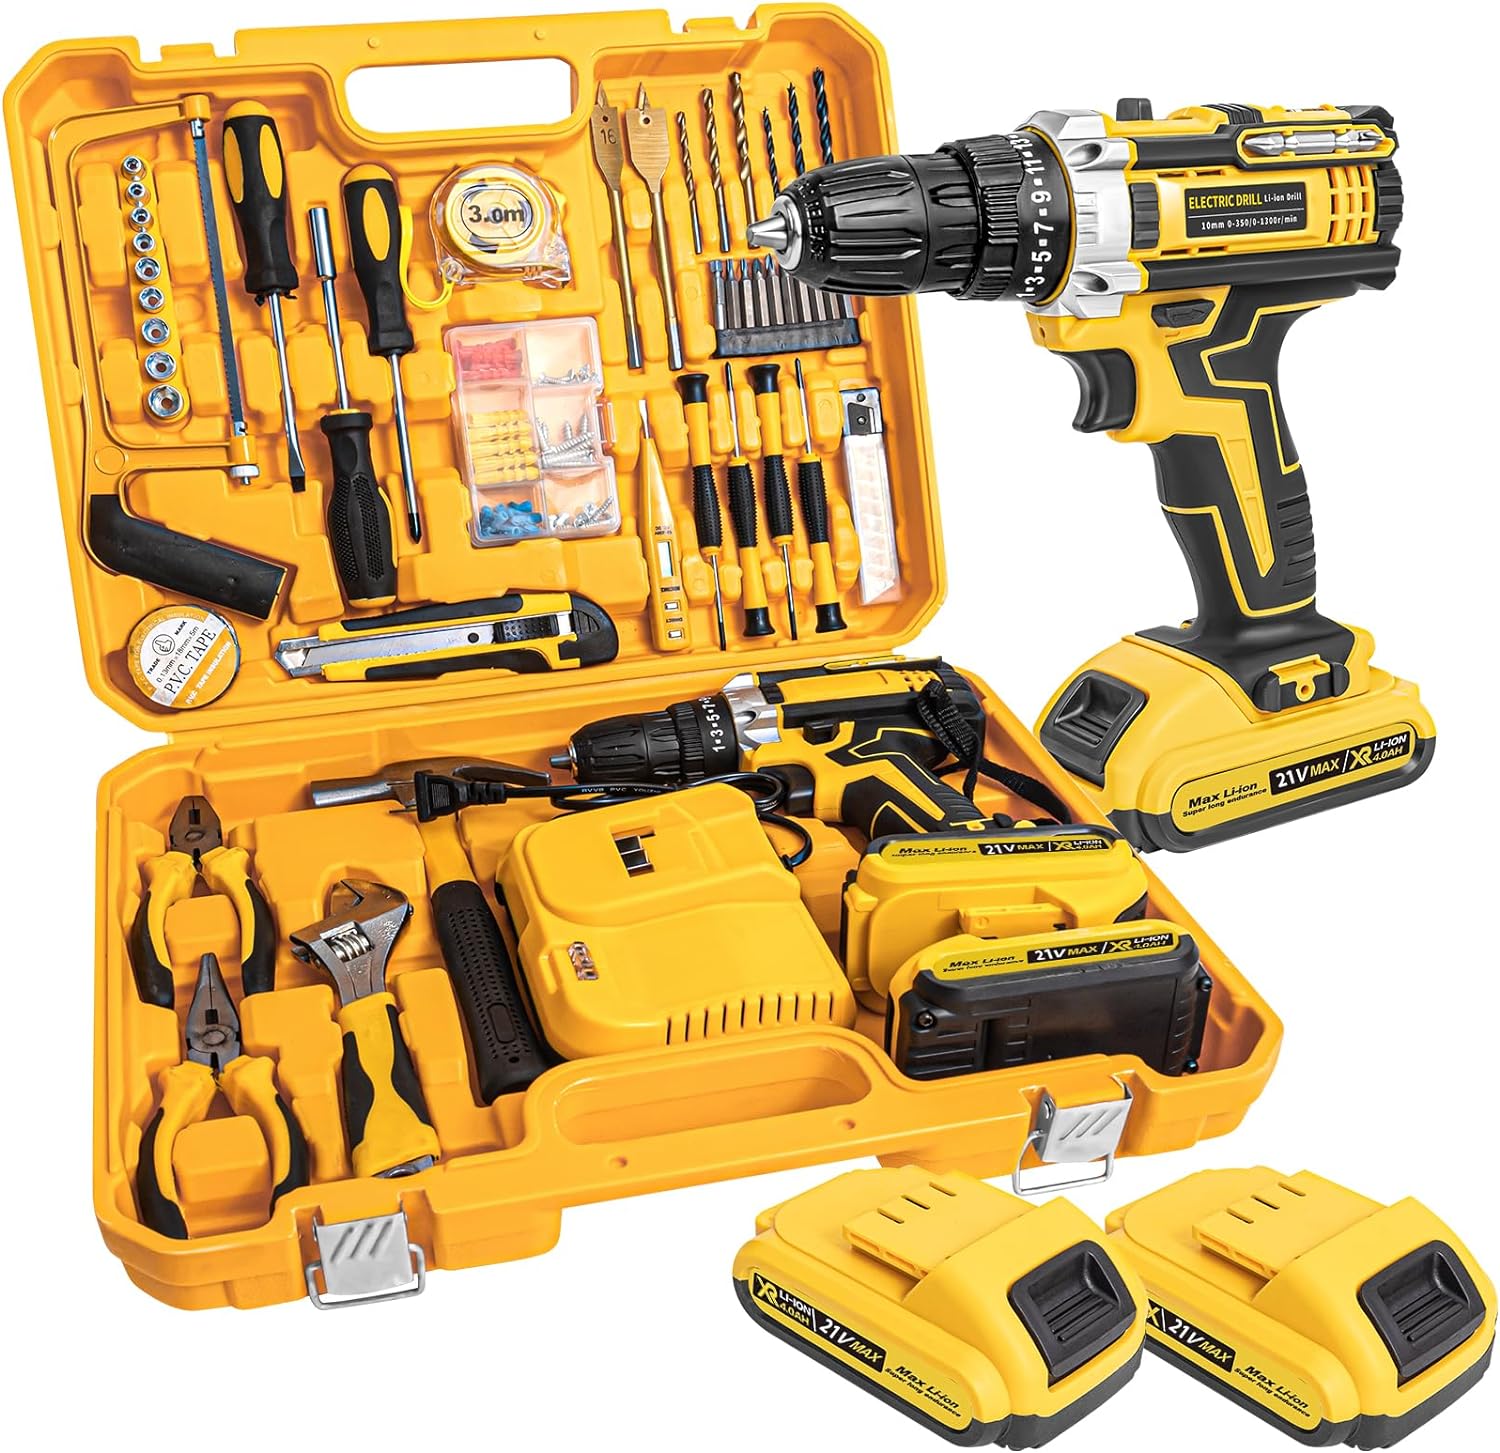 Tiktik 21V Cordless Drill Set Combo Kit,119 Pcs Household Tool Sets For Men,Basic Power Drill Tool Kit,Tool Set With Drill  2 * 2.0Ah Battery  1 Fast Charger,Home Kit For House And Garden Repairs